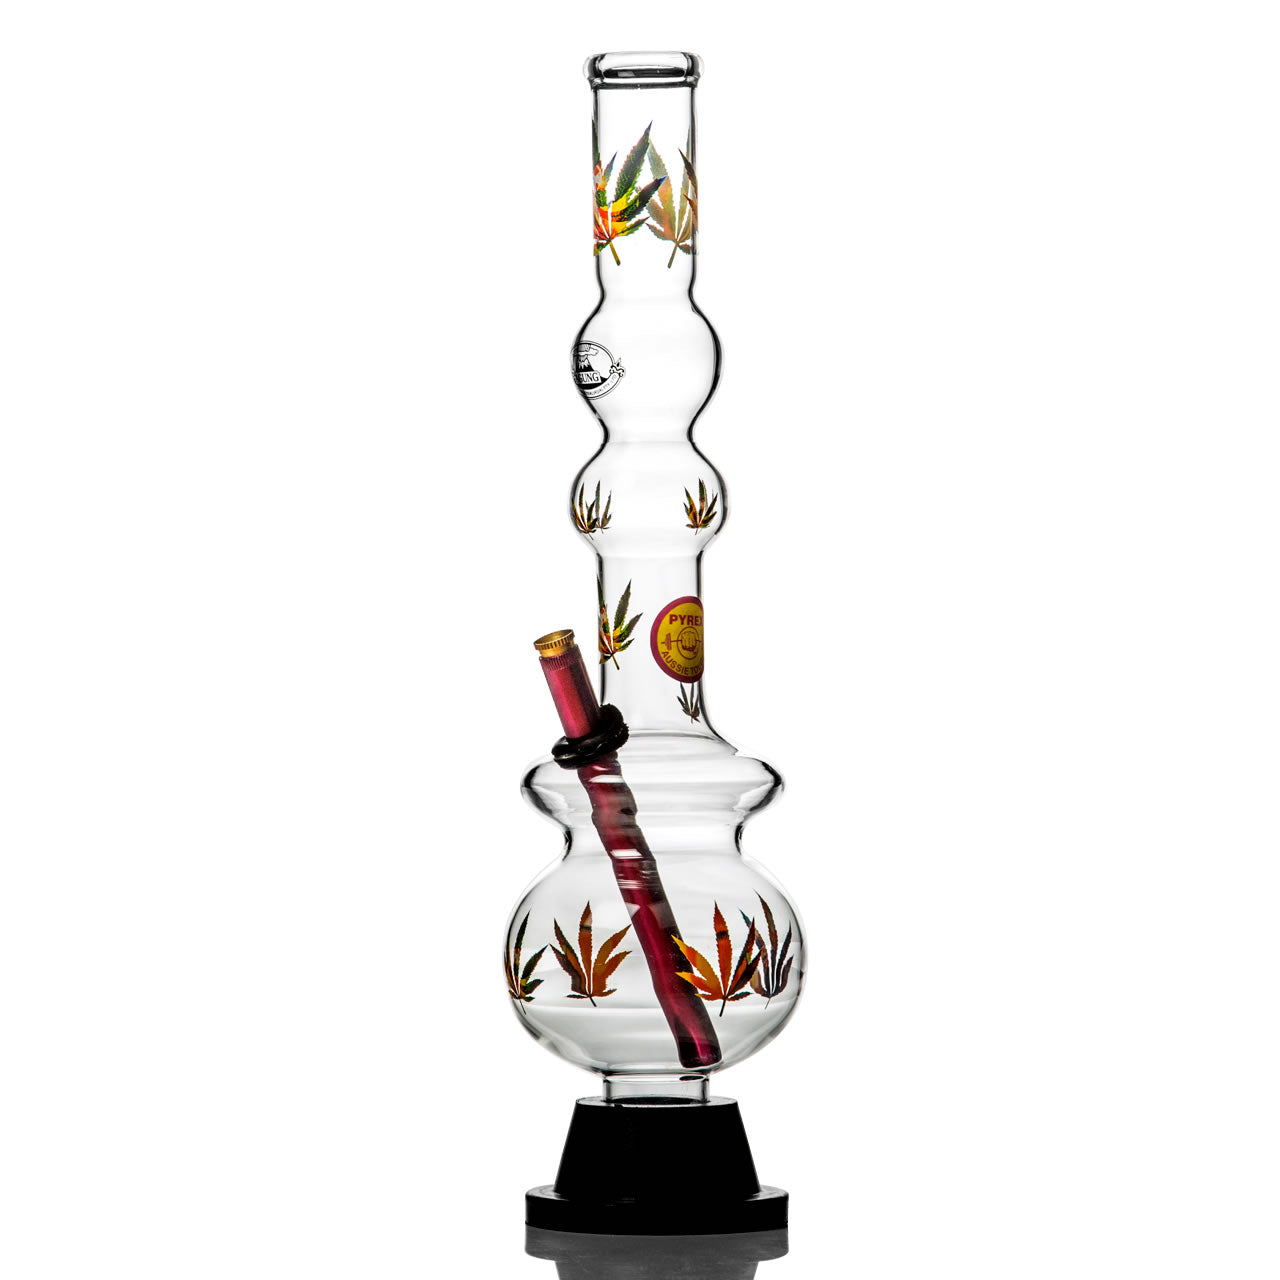 Agung large 43cm multi bubble bong with weed leaf decals.